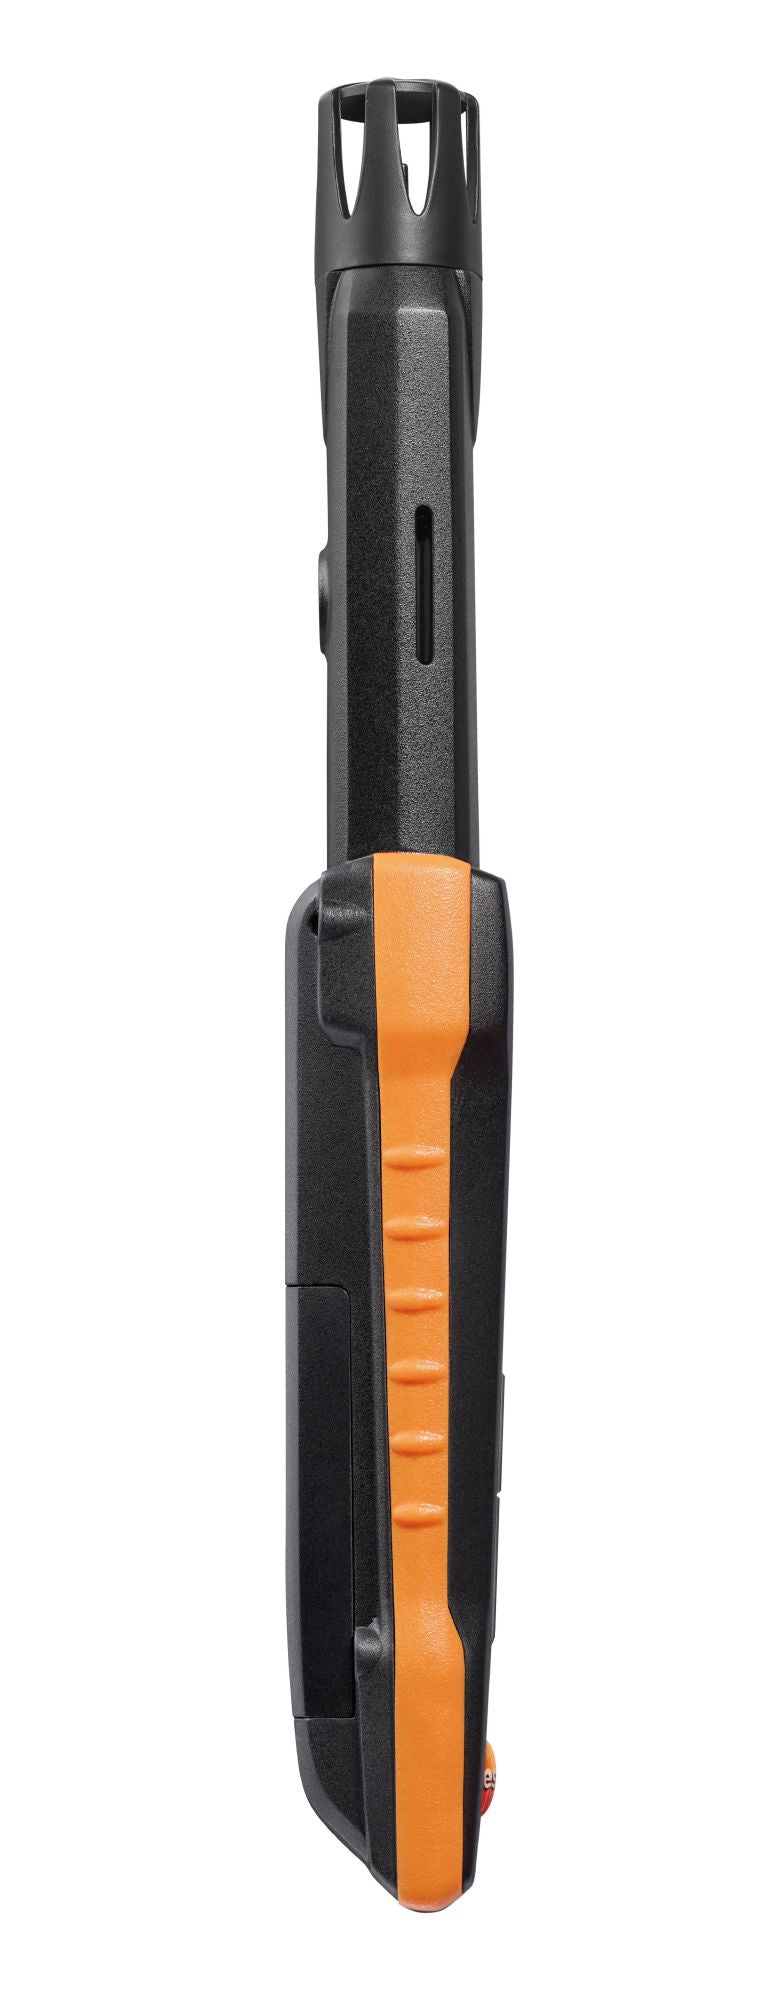 Testo 535 -  Digital CO2 measuring instrument with App connection